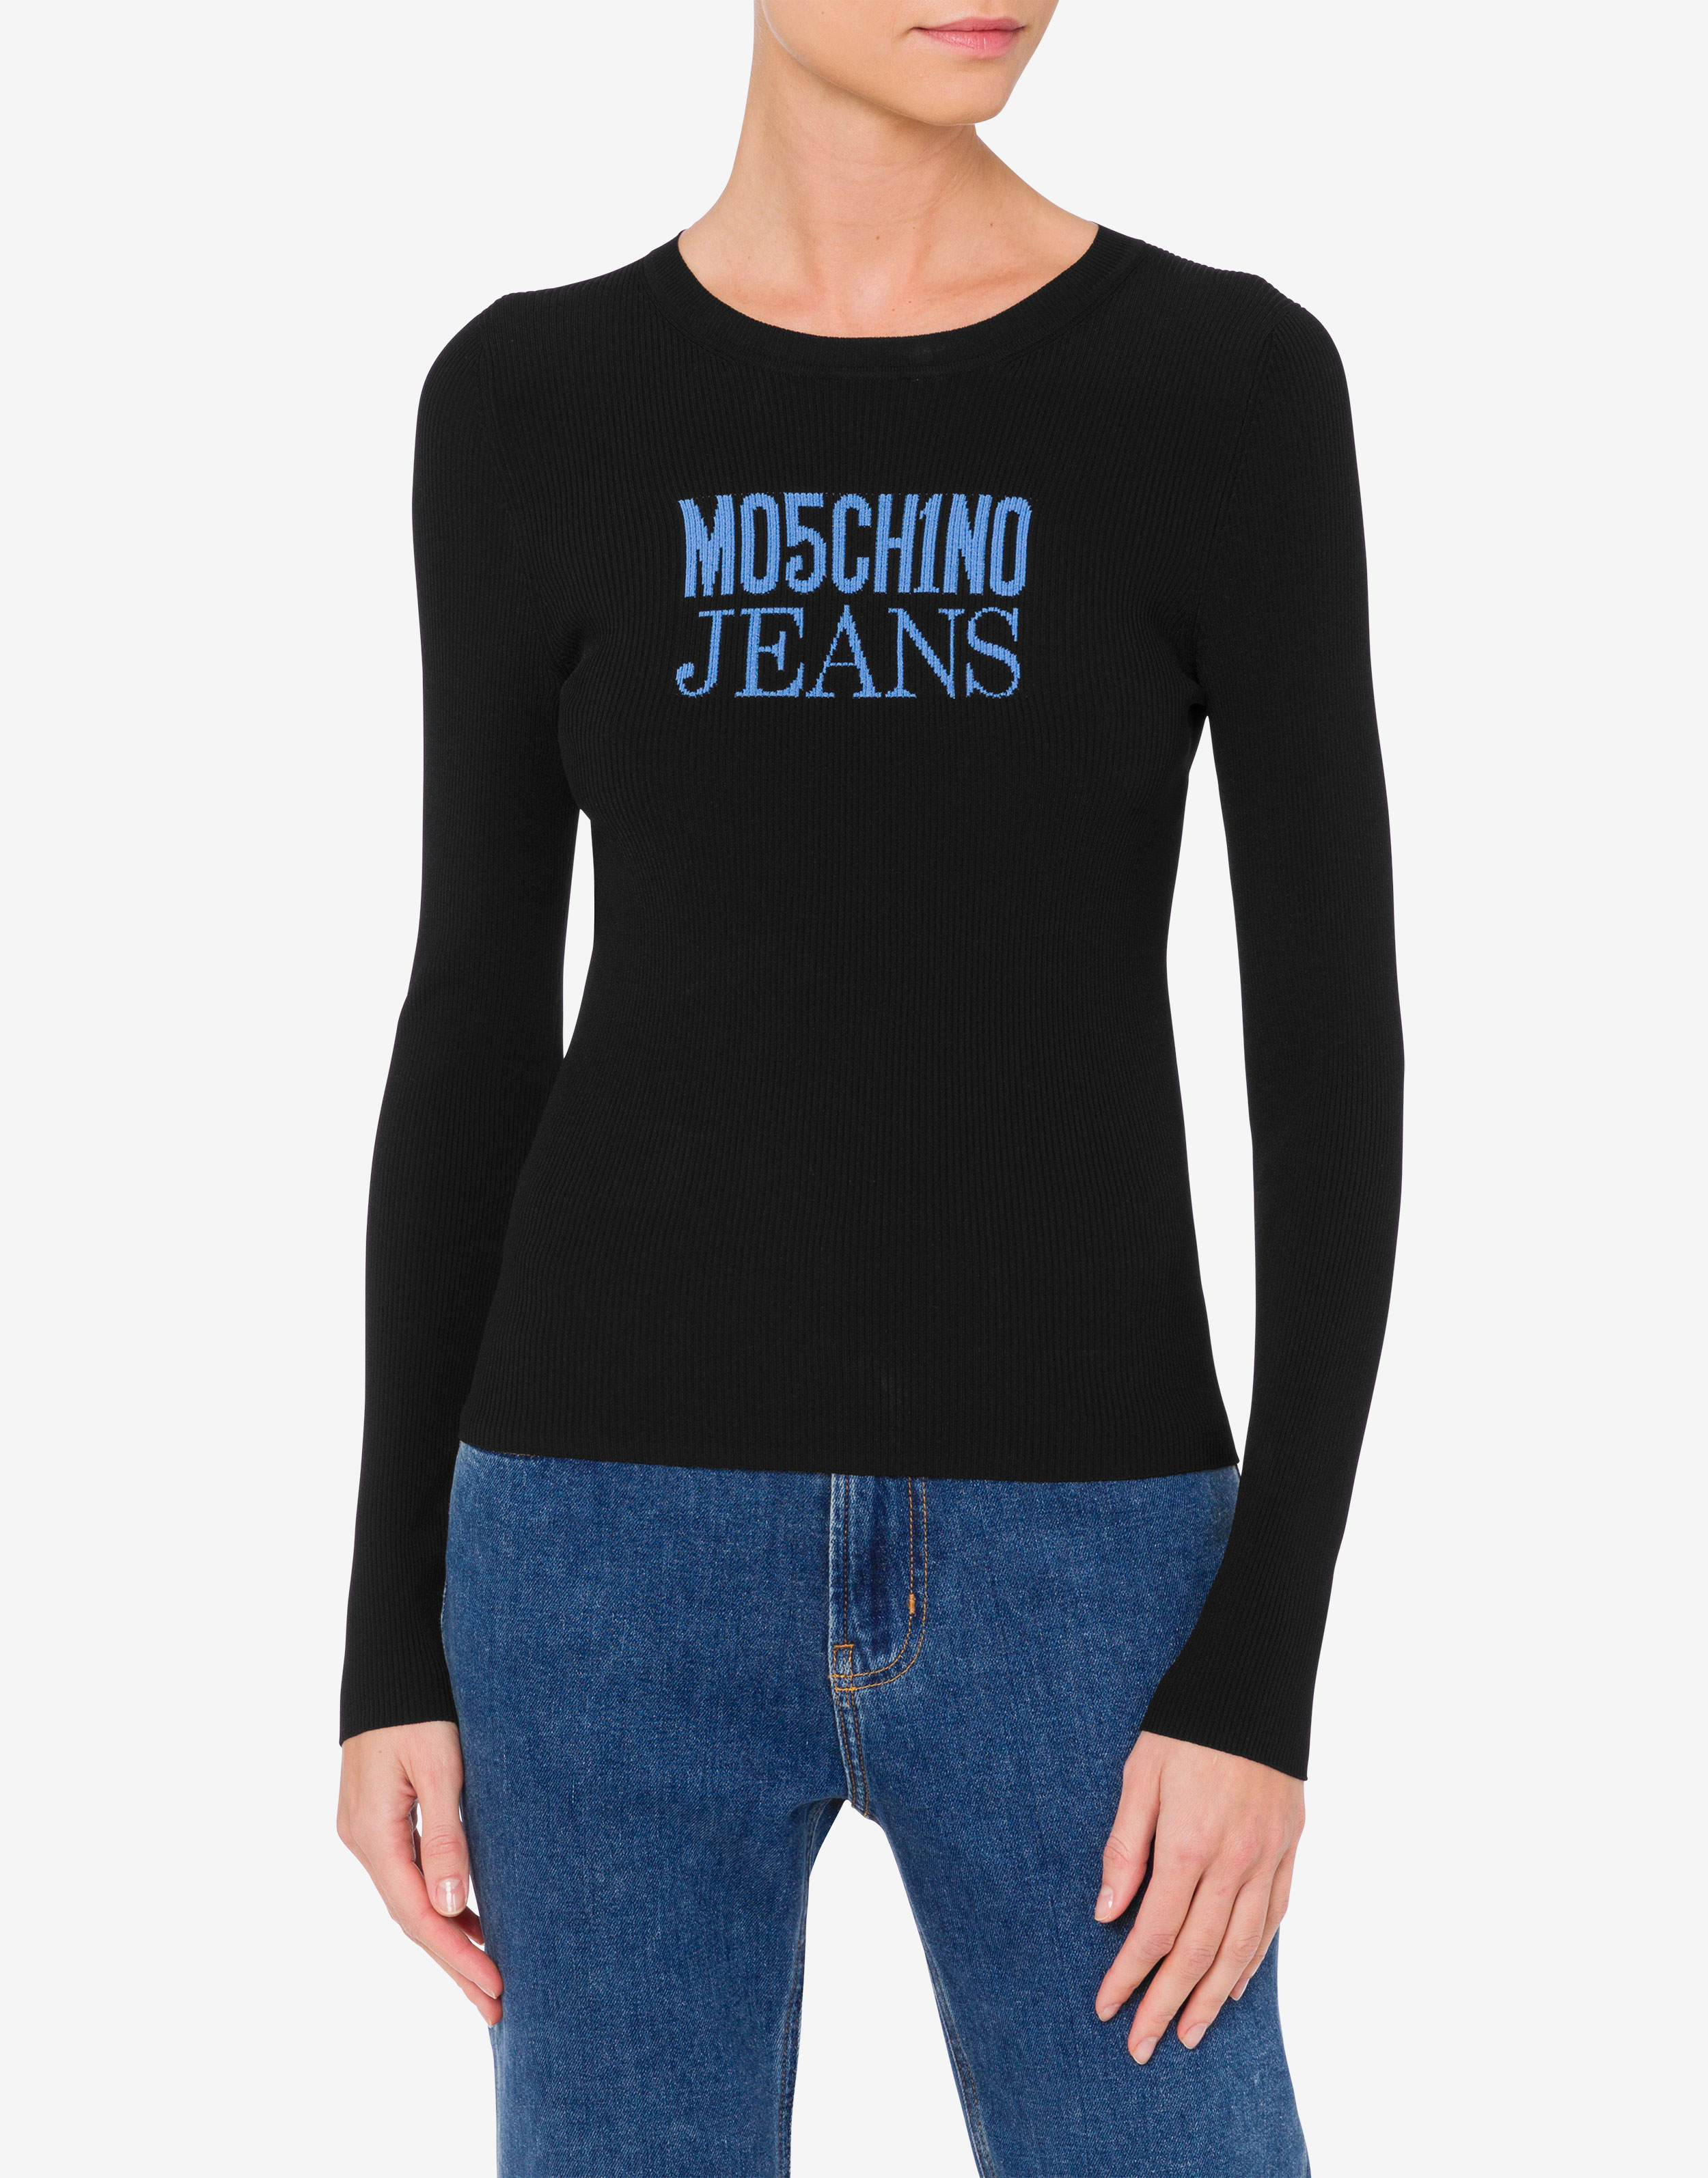 Moschino Jeans | Moschino Official Store